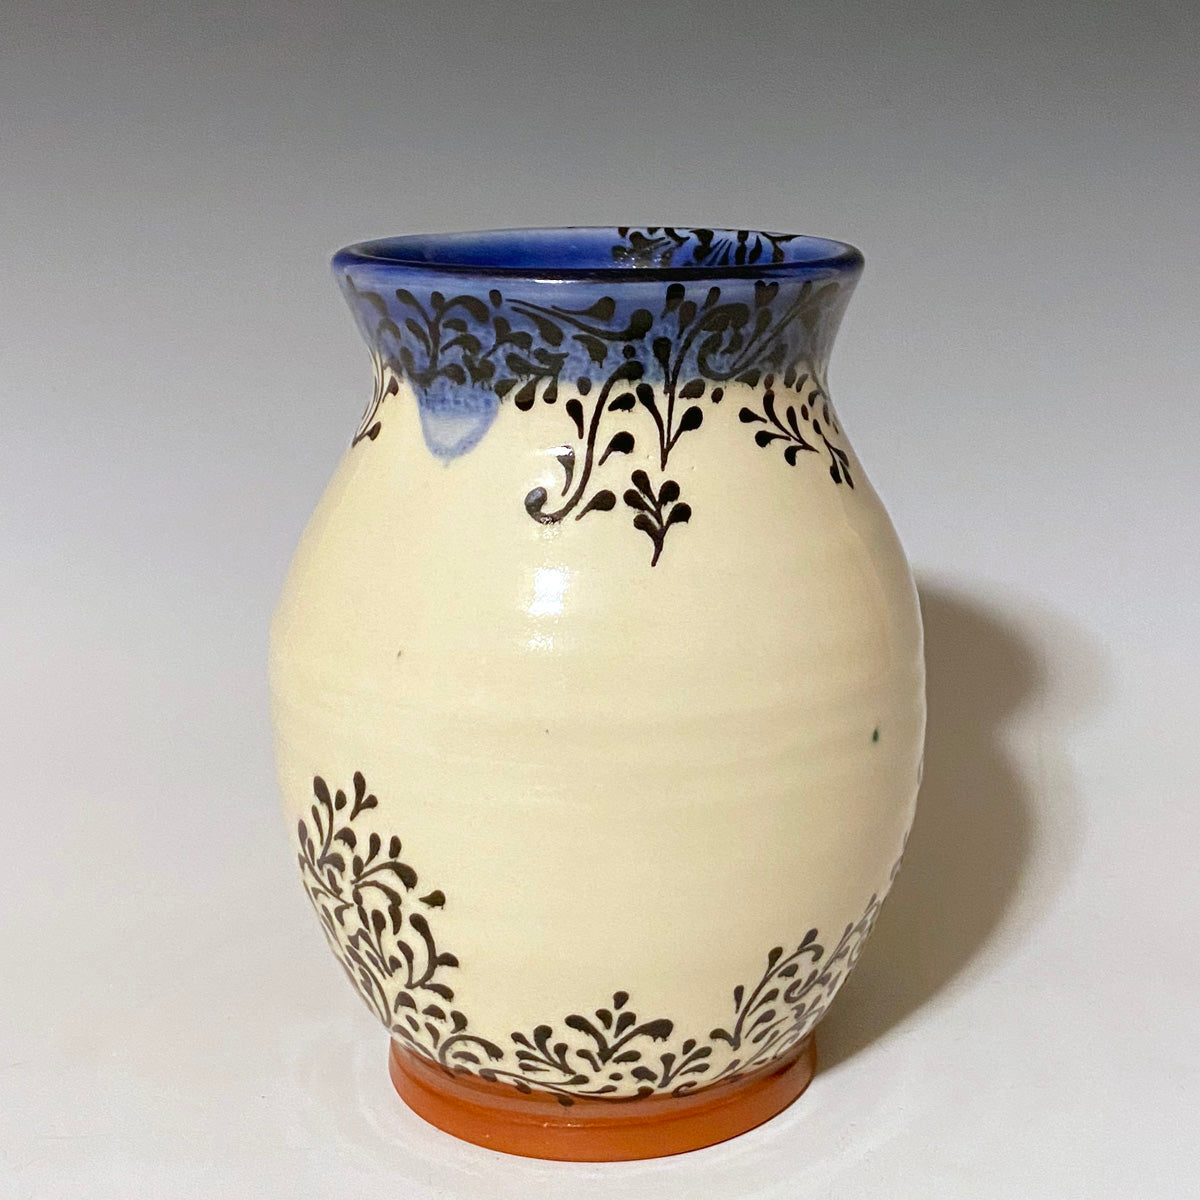 Black and Blue small vase